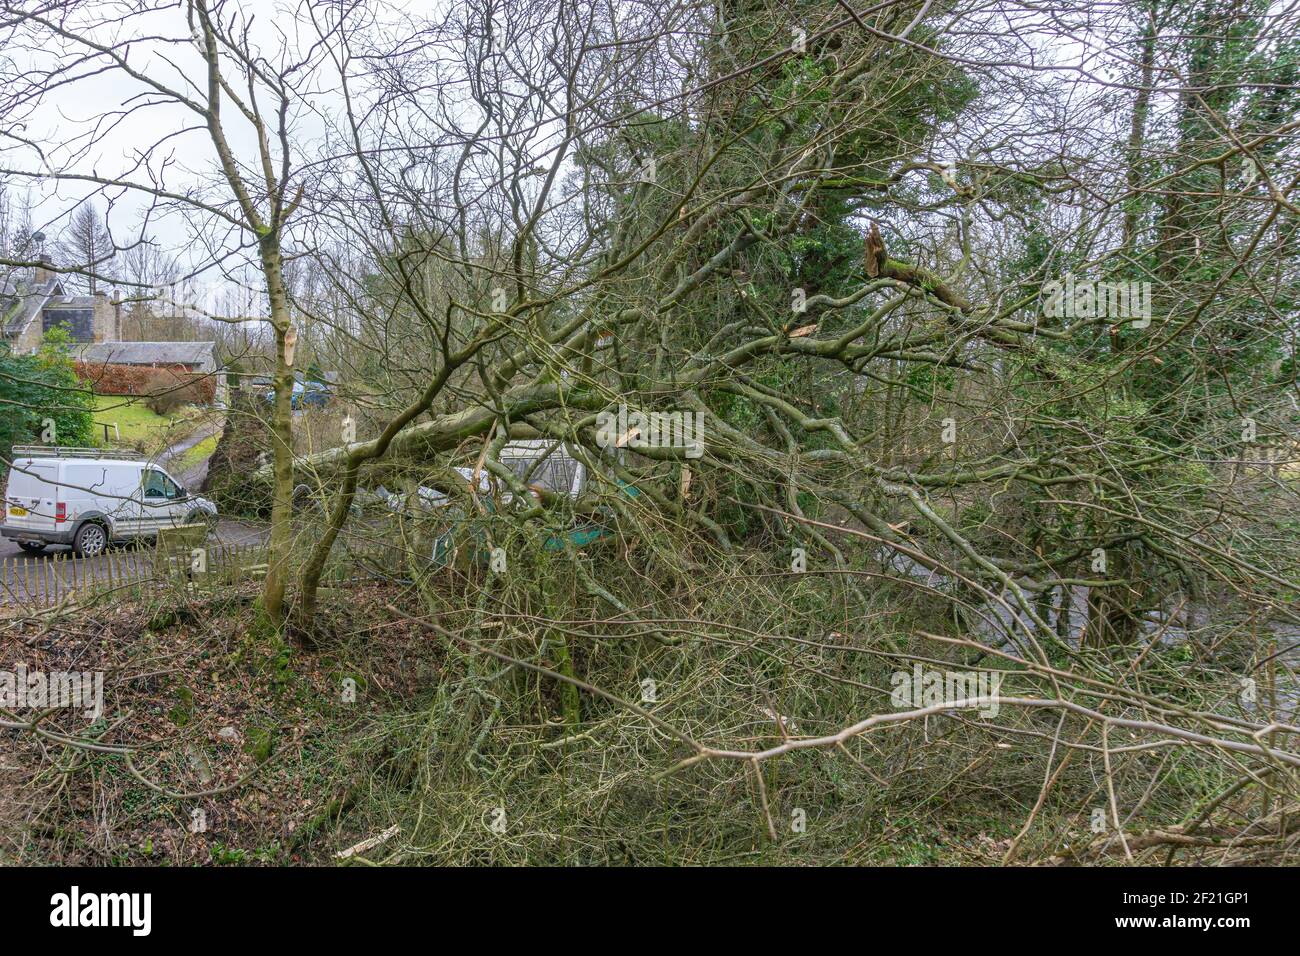 Irvine, Scotland, UK - February 24, 2021: Ancient tree at Perceton in Irvine blown down by strong winds which luckily missed nearby residential housin Stock Photo